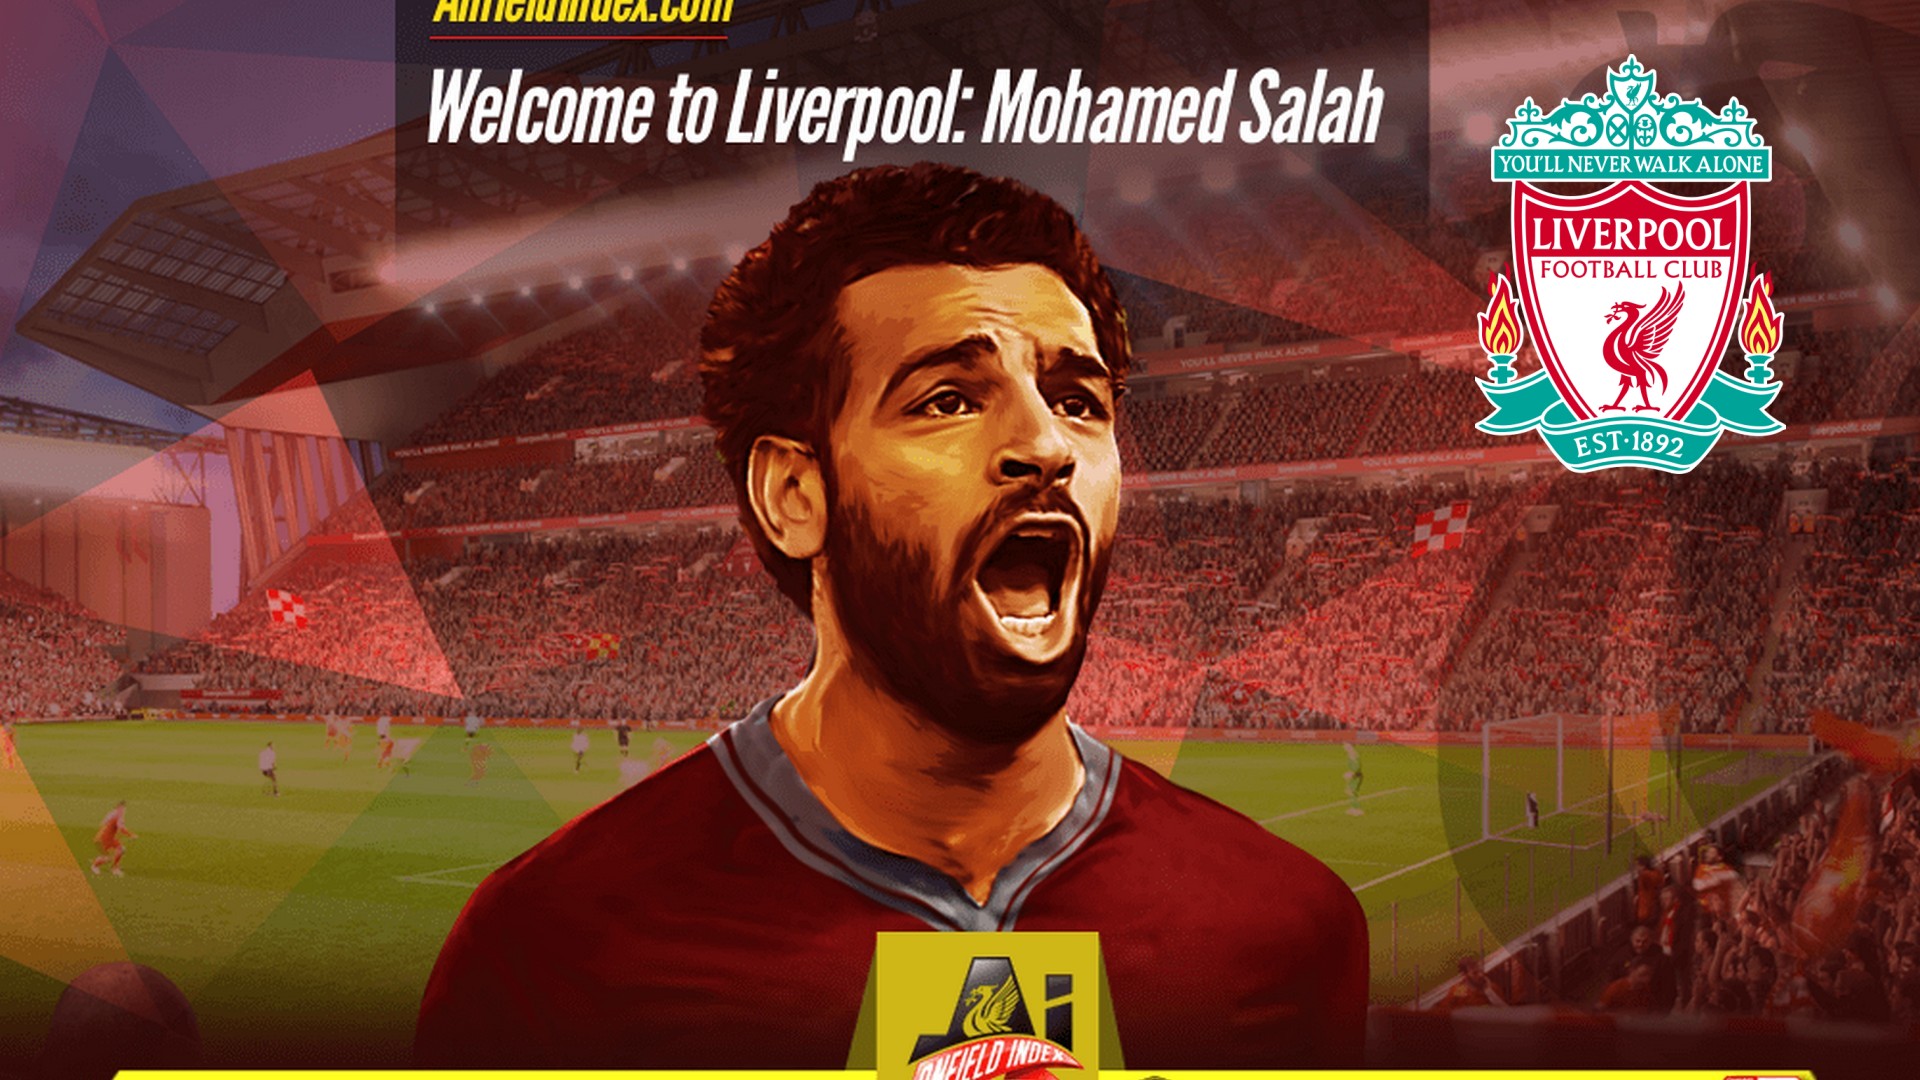 Salah Liverpool Wallpaper HD With Resolution 1920X1080 pixel. You can make this wallpaper for your Desktop Computer Backgrounds, Mac Wallpapers, Android Lock screen or iPhone Screensavers